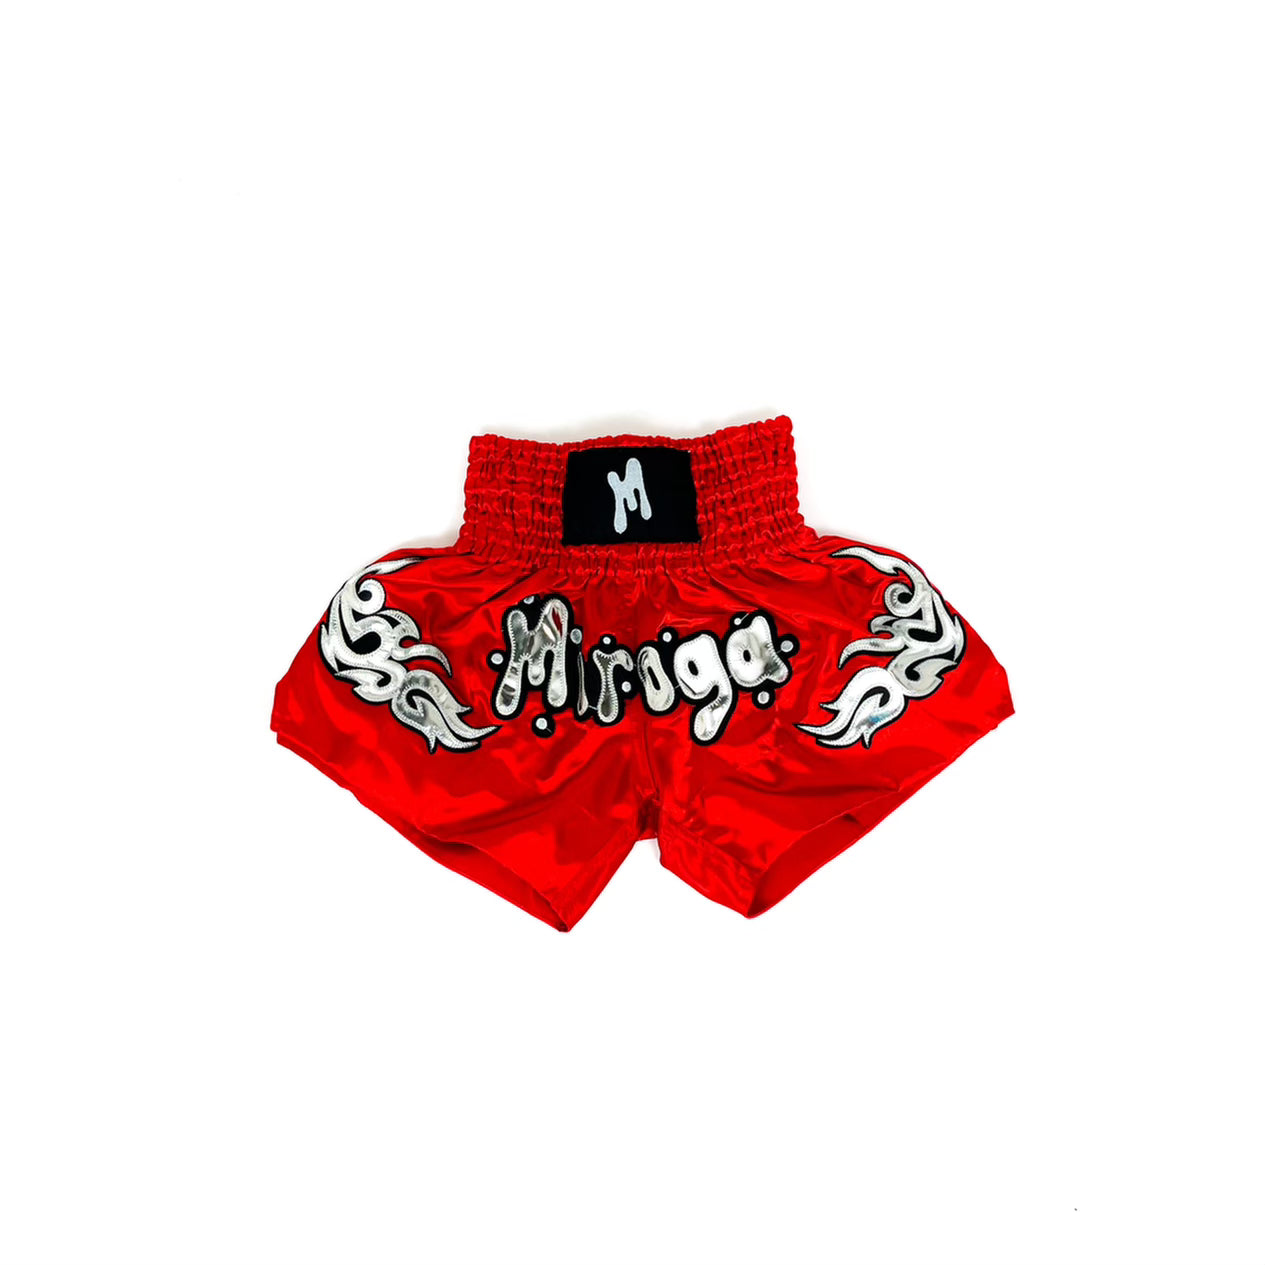 Miroga Chain Silver Short Red